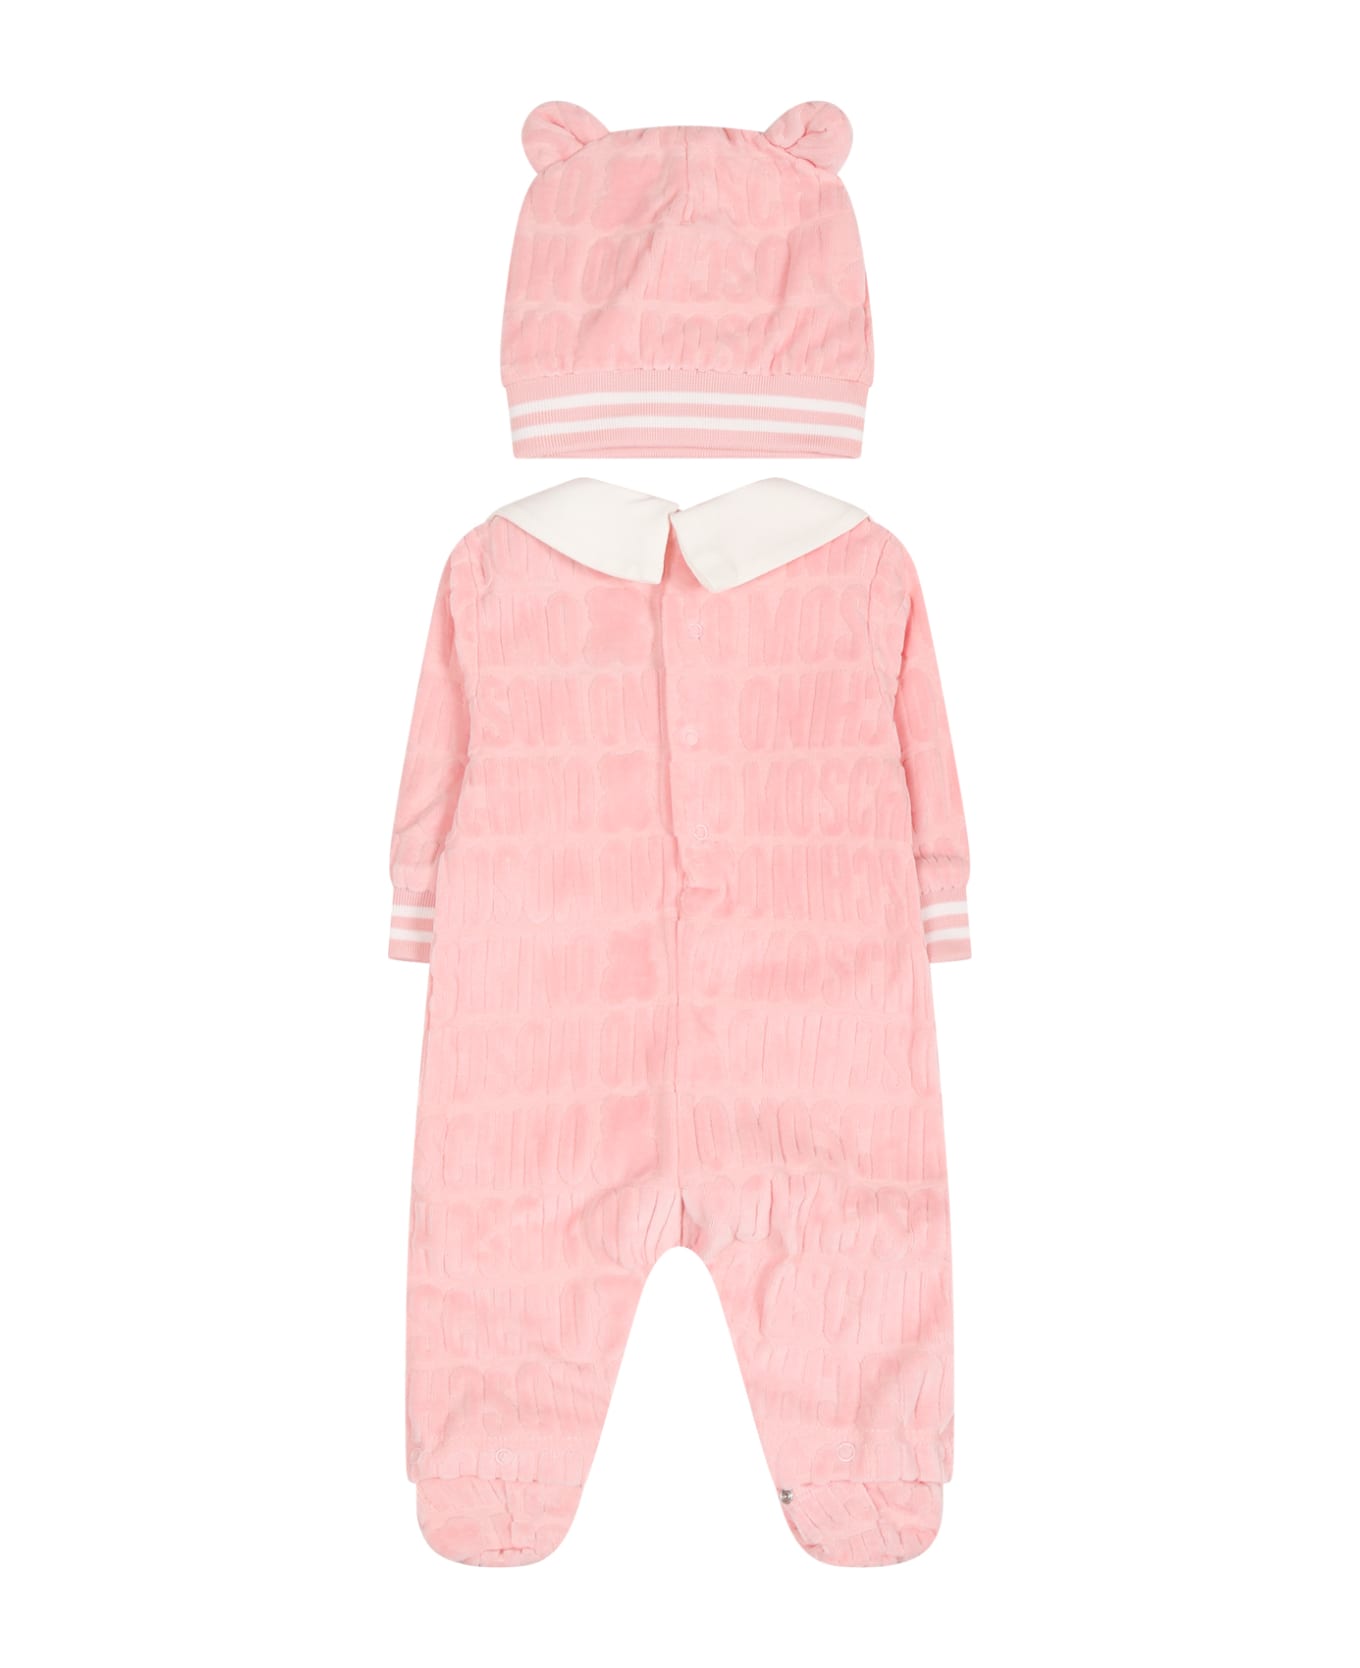 Moschino Pink Set For Baby Girl With Logo - Pink